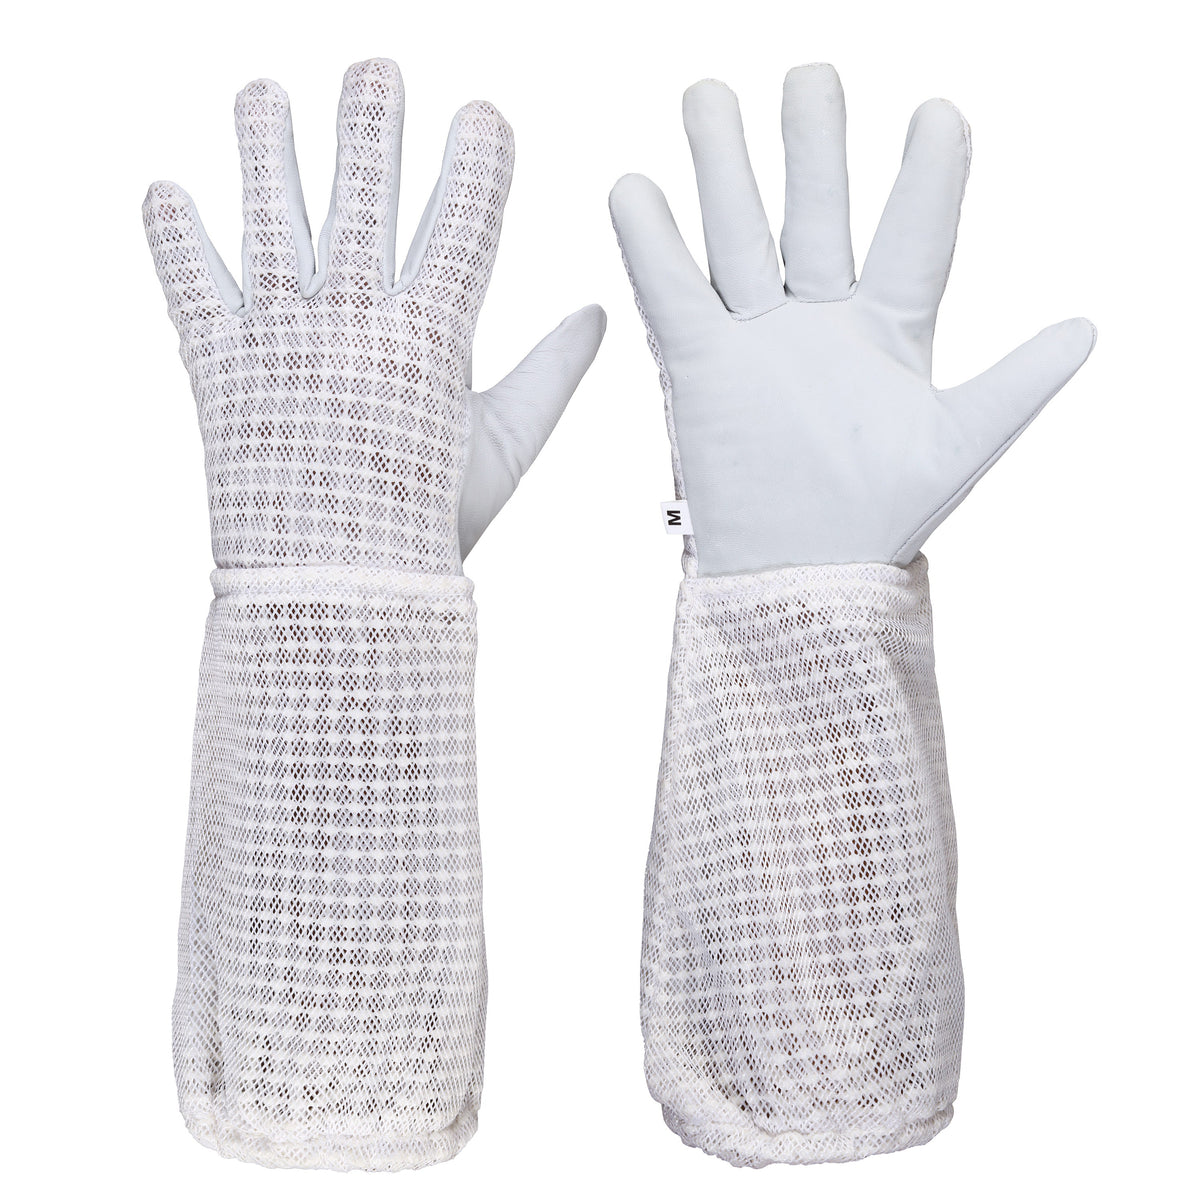 Goatskin Beekeeping Gloves with 3Layers Ventilation